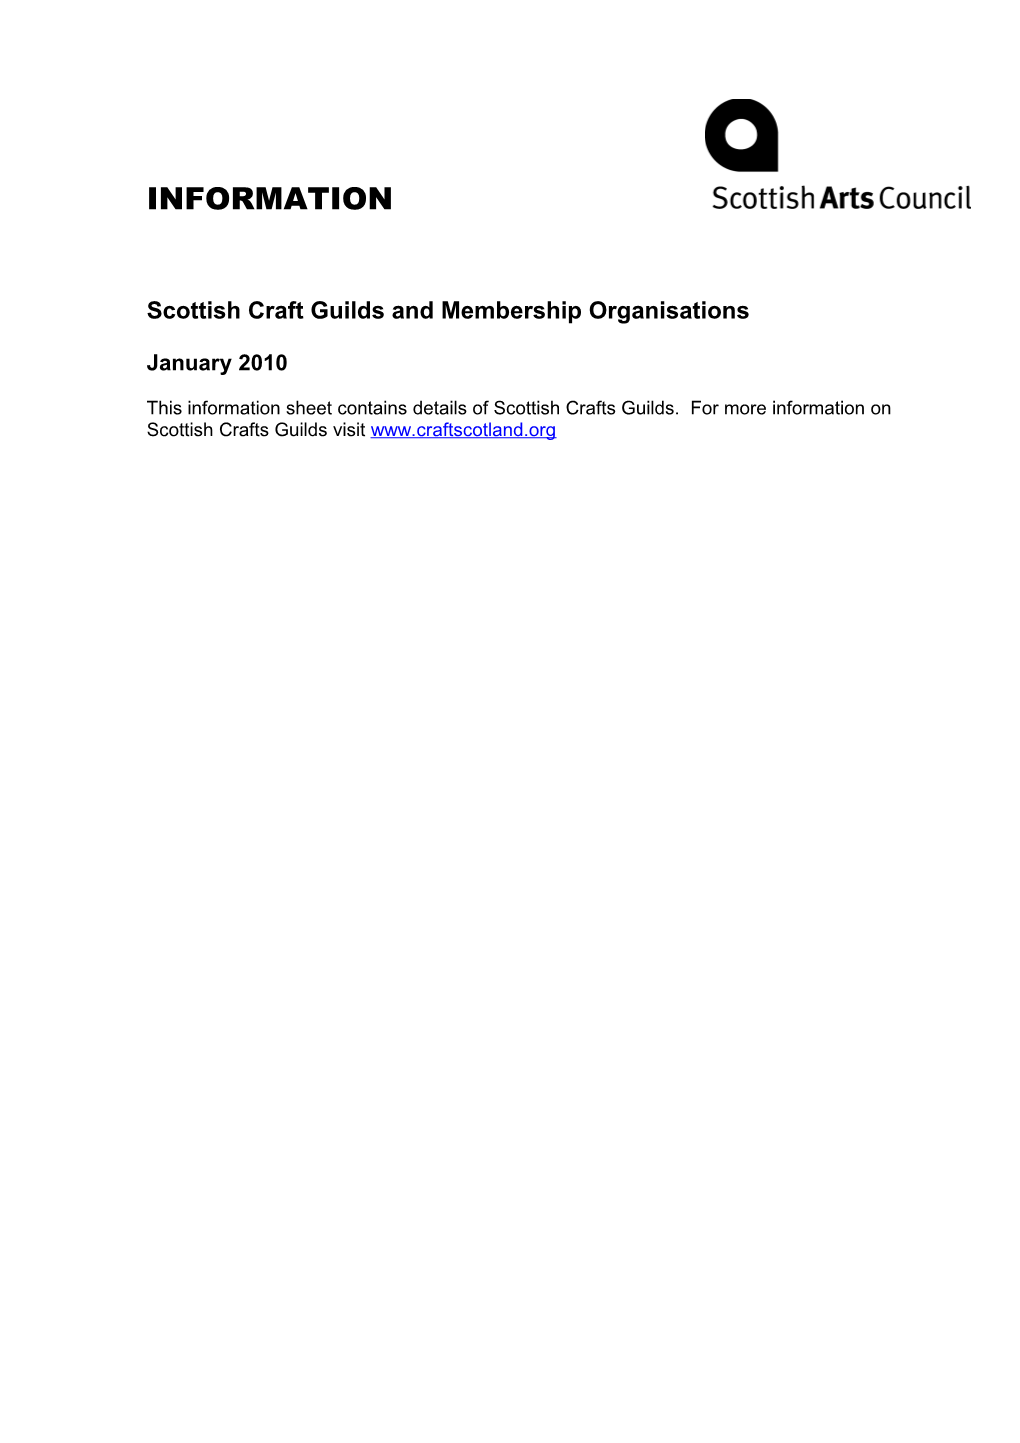 Scottish Craft Guilds and Membership Organisations